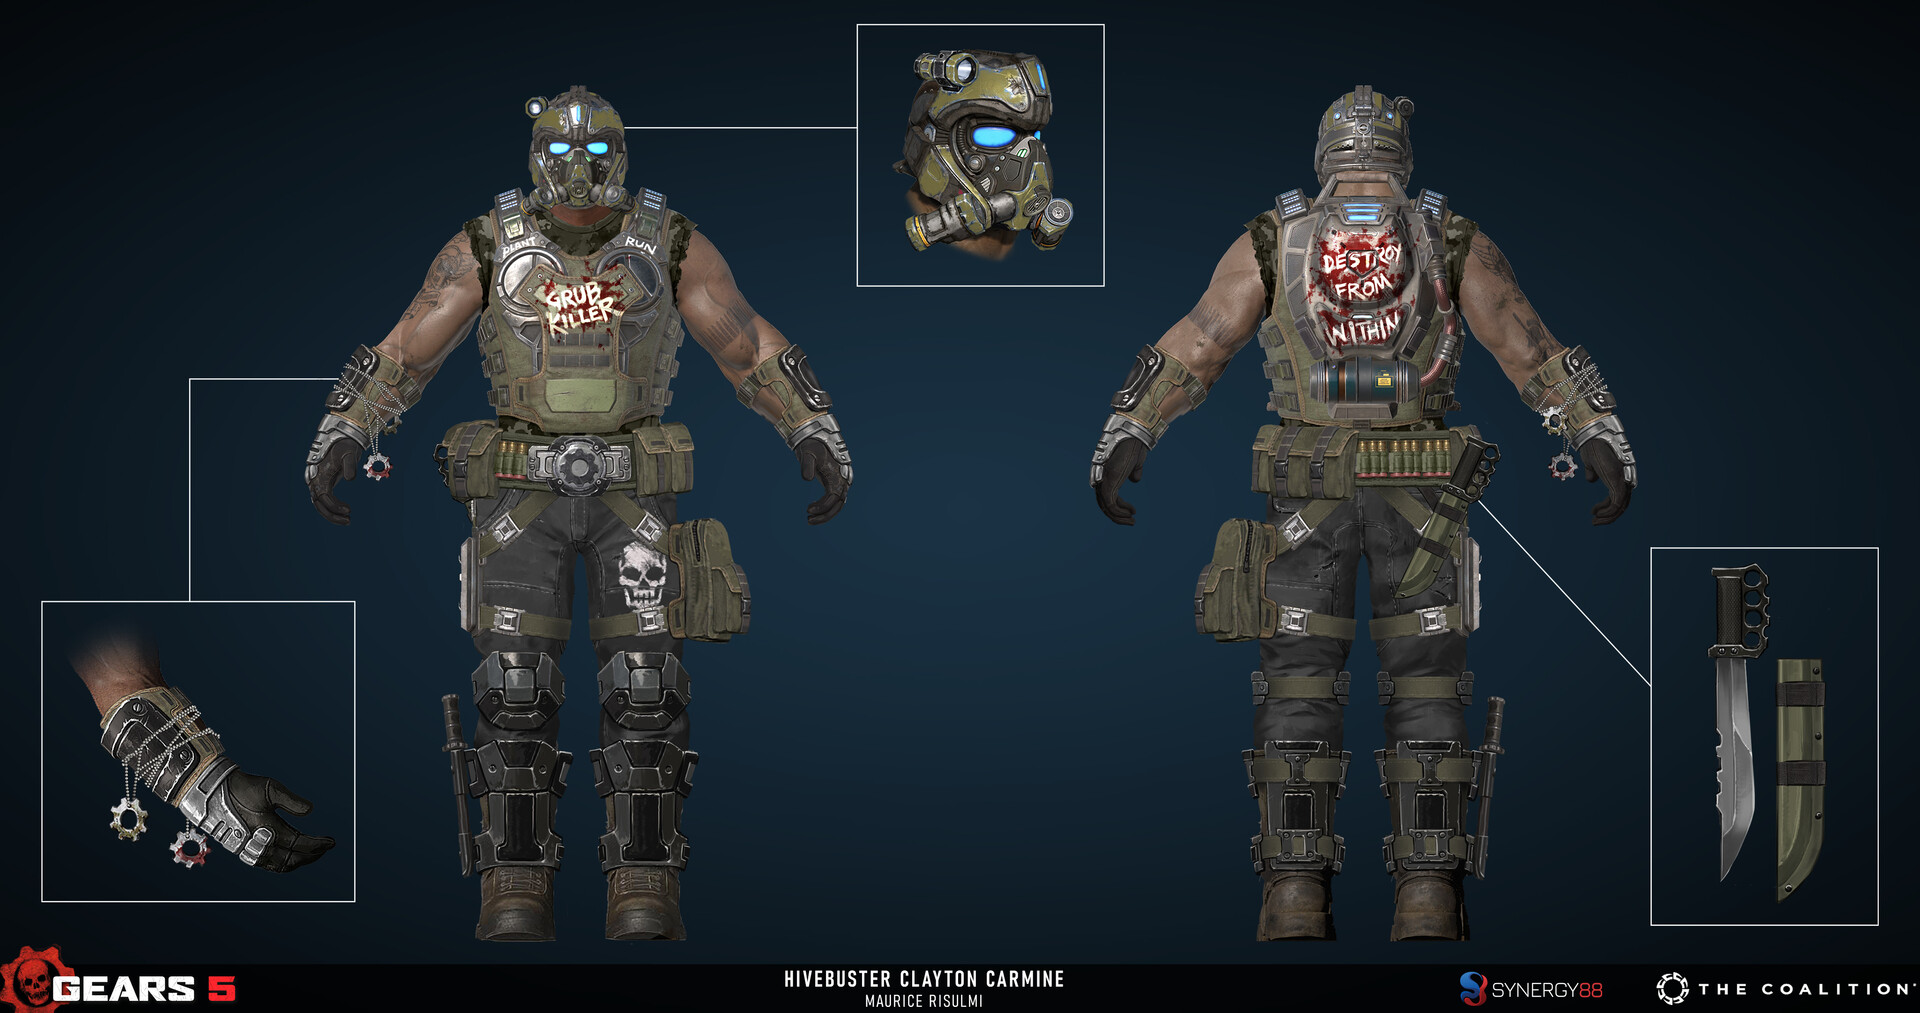 Gears 5 Hivebusters 11 by Passos1993 on DeviantArt